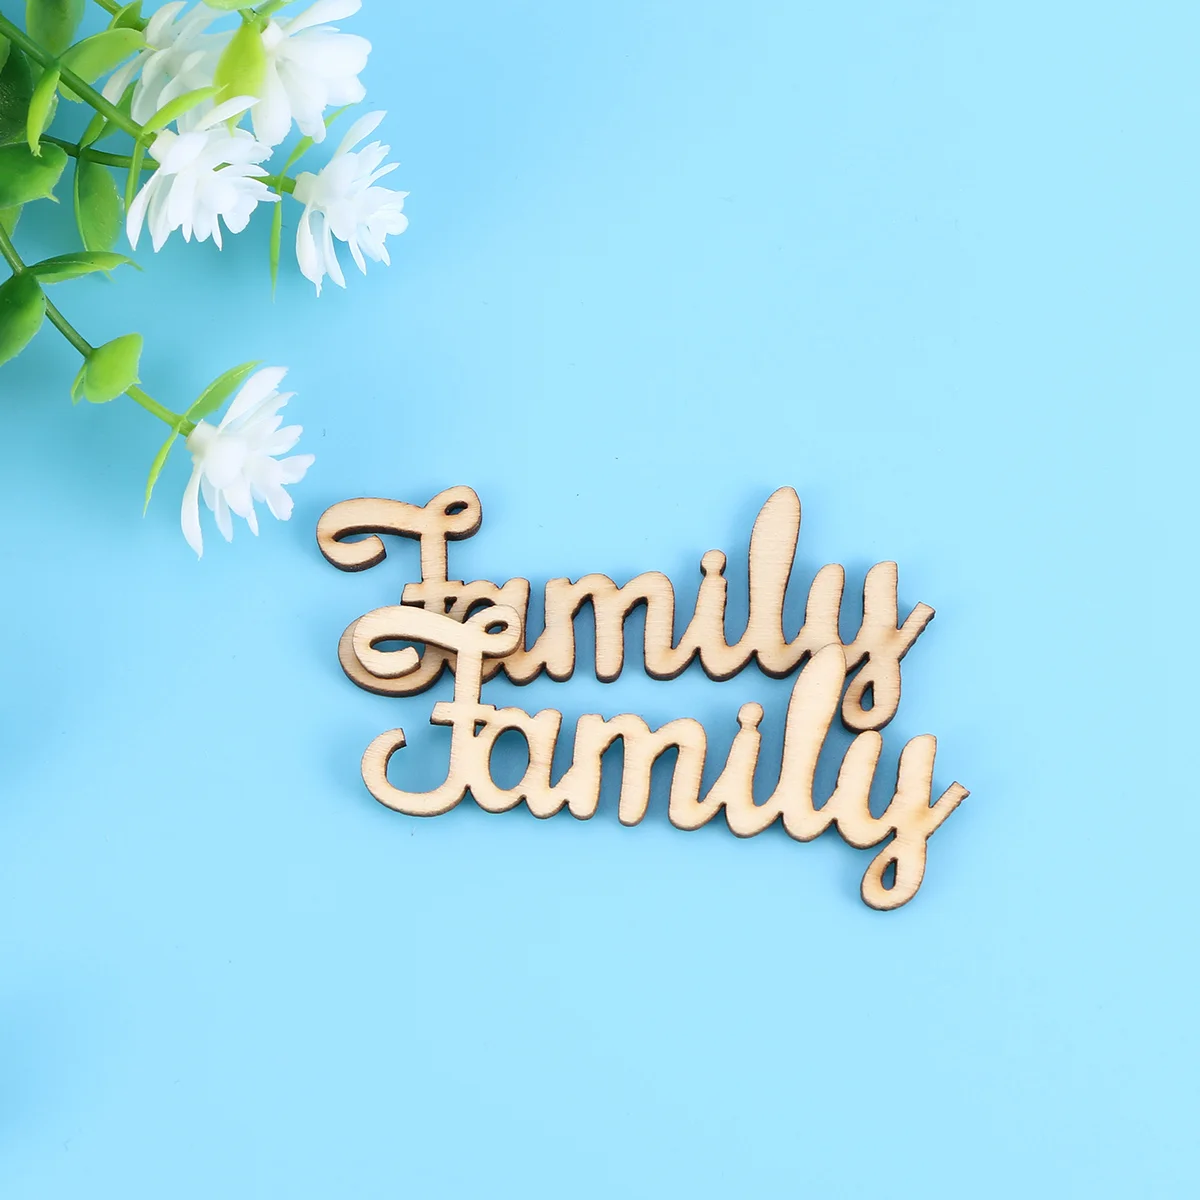 

Family Wood Craft Cutouts: 10pcs Unfinished Family Wood Words Ornaments Rustic Wooden Family Letters Slices Embellishments Gift